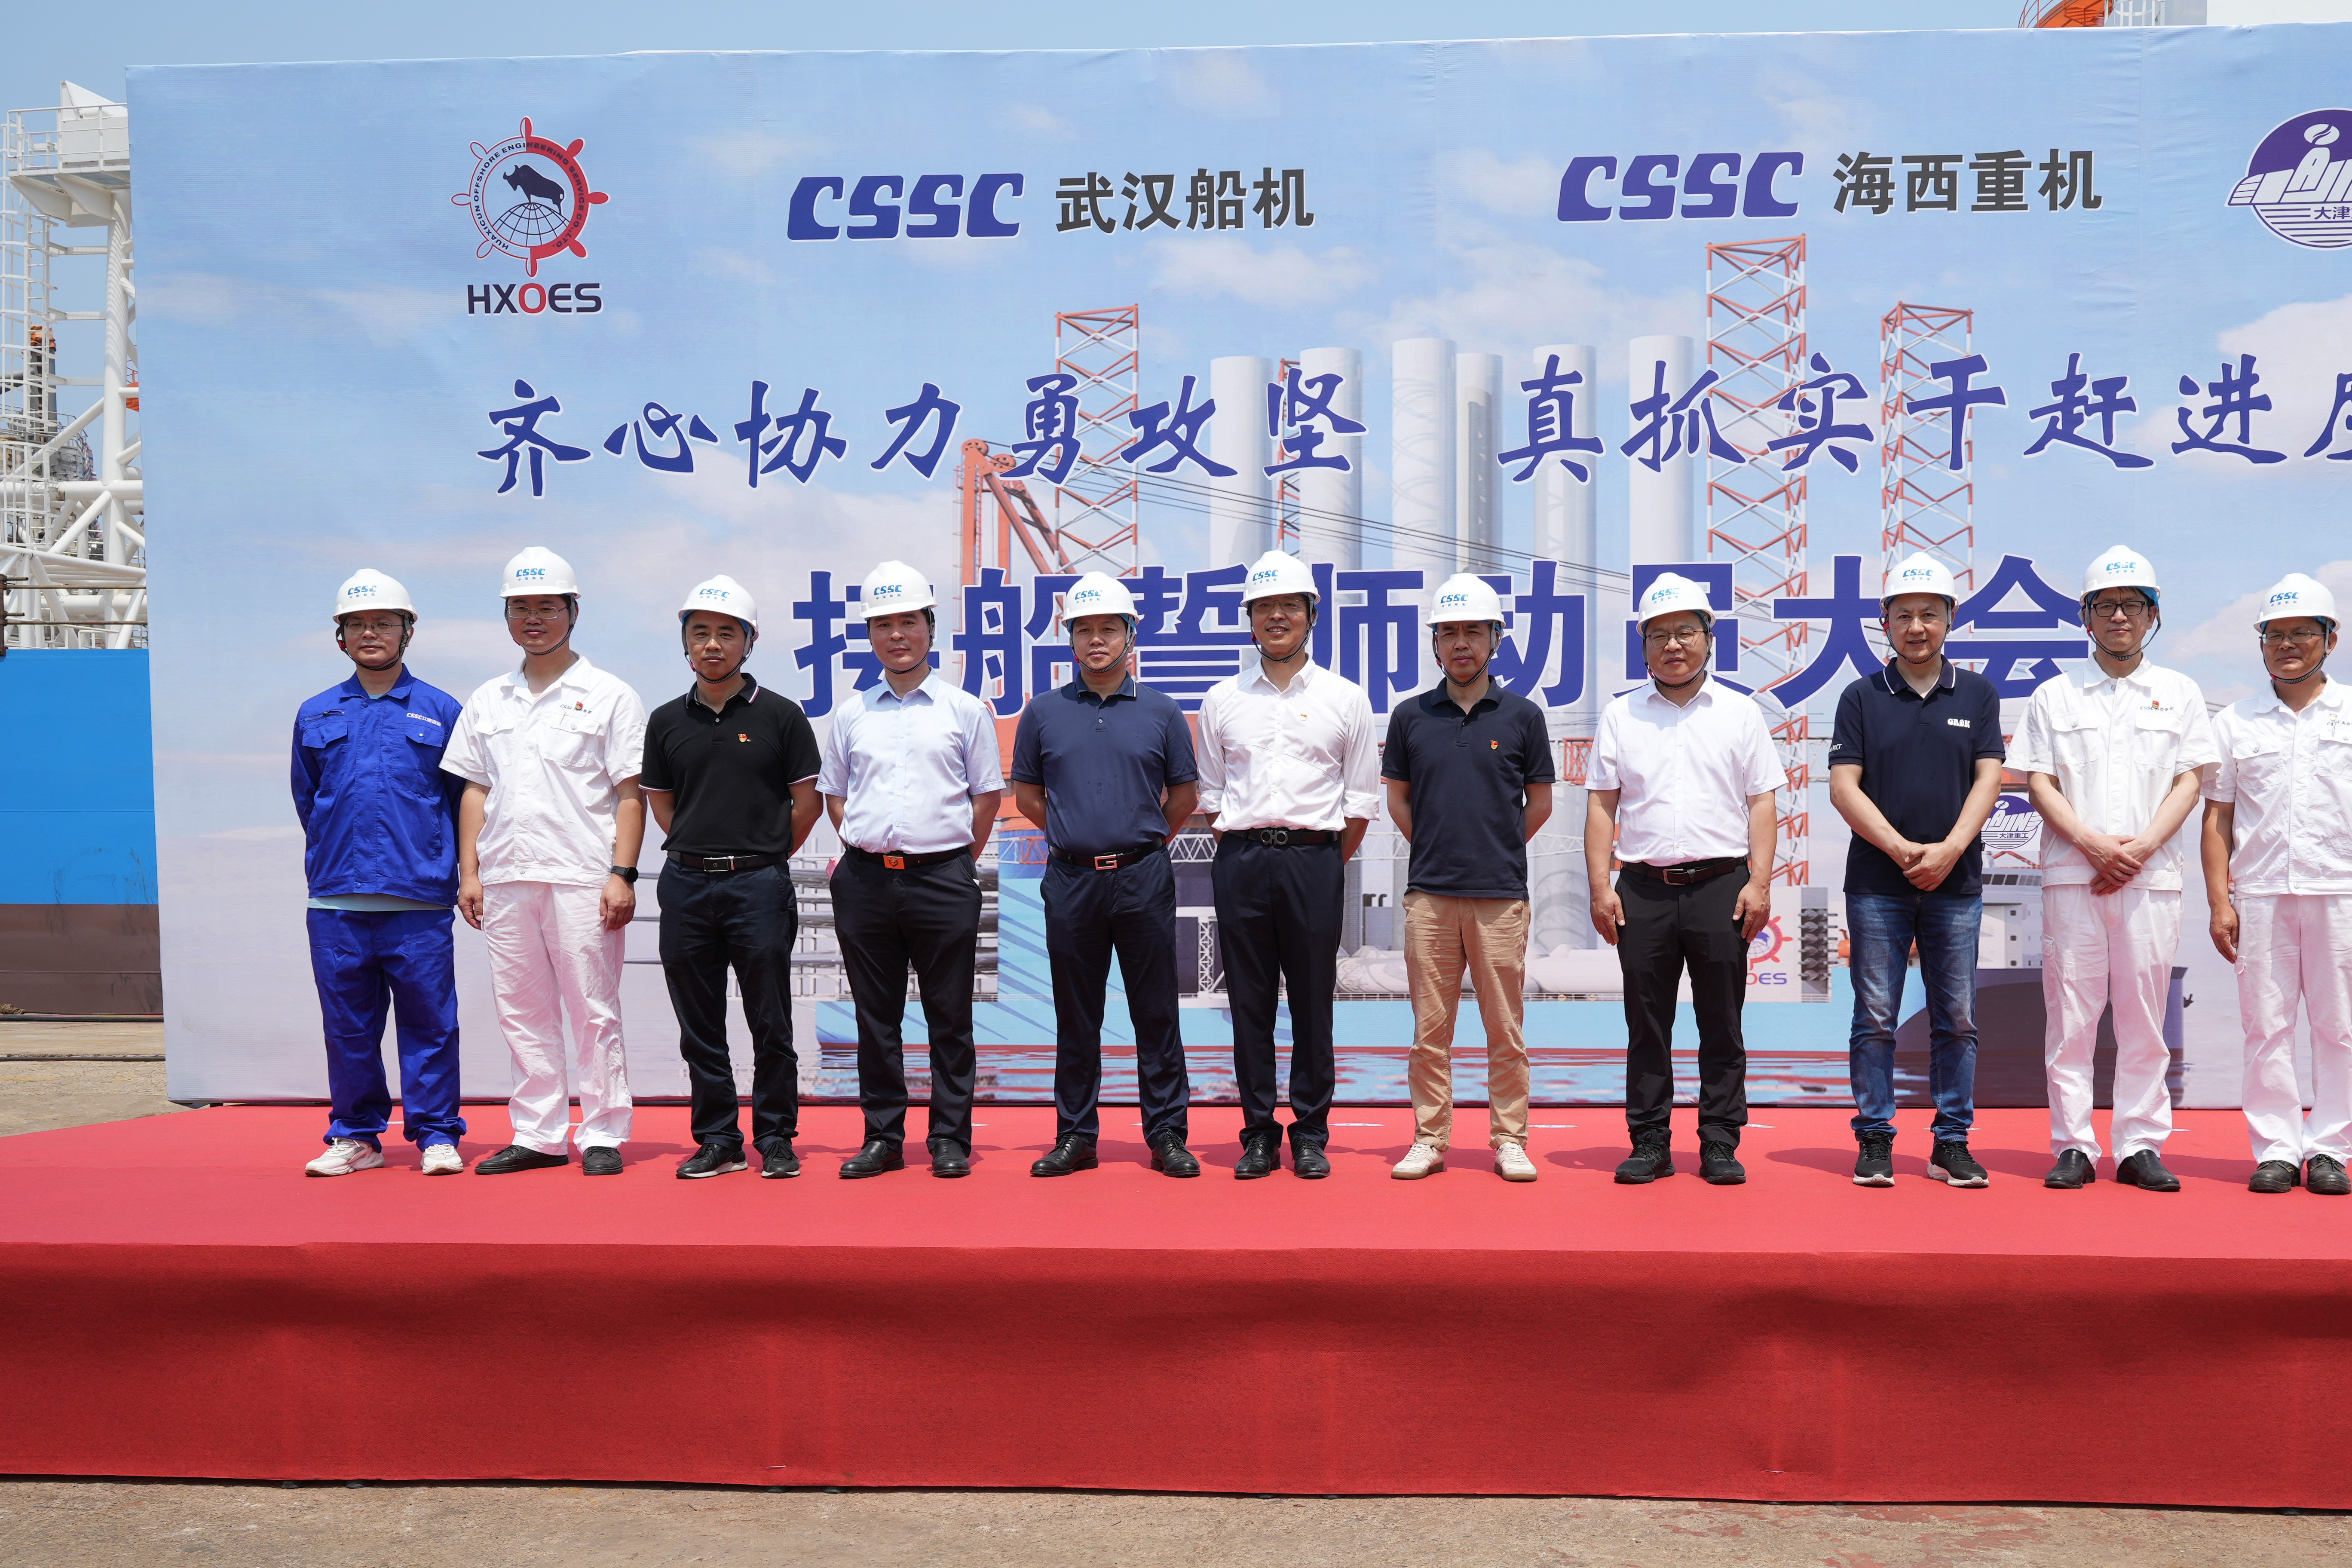 Collaborate bravely to tackle difficulties, work hard to catch up with the progress - Huaxi 1600 successfully held a mobilization conference for the ship acceptance oath at Haixi Heavy Machinery Co., Ltd